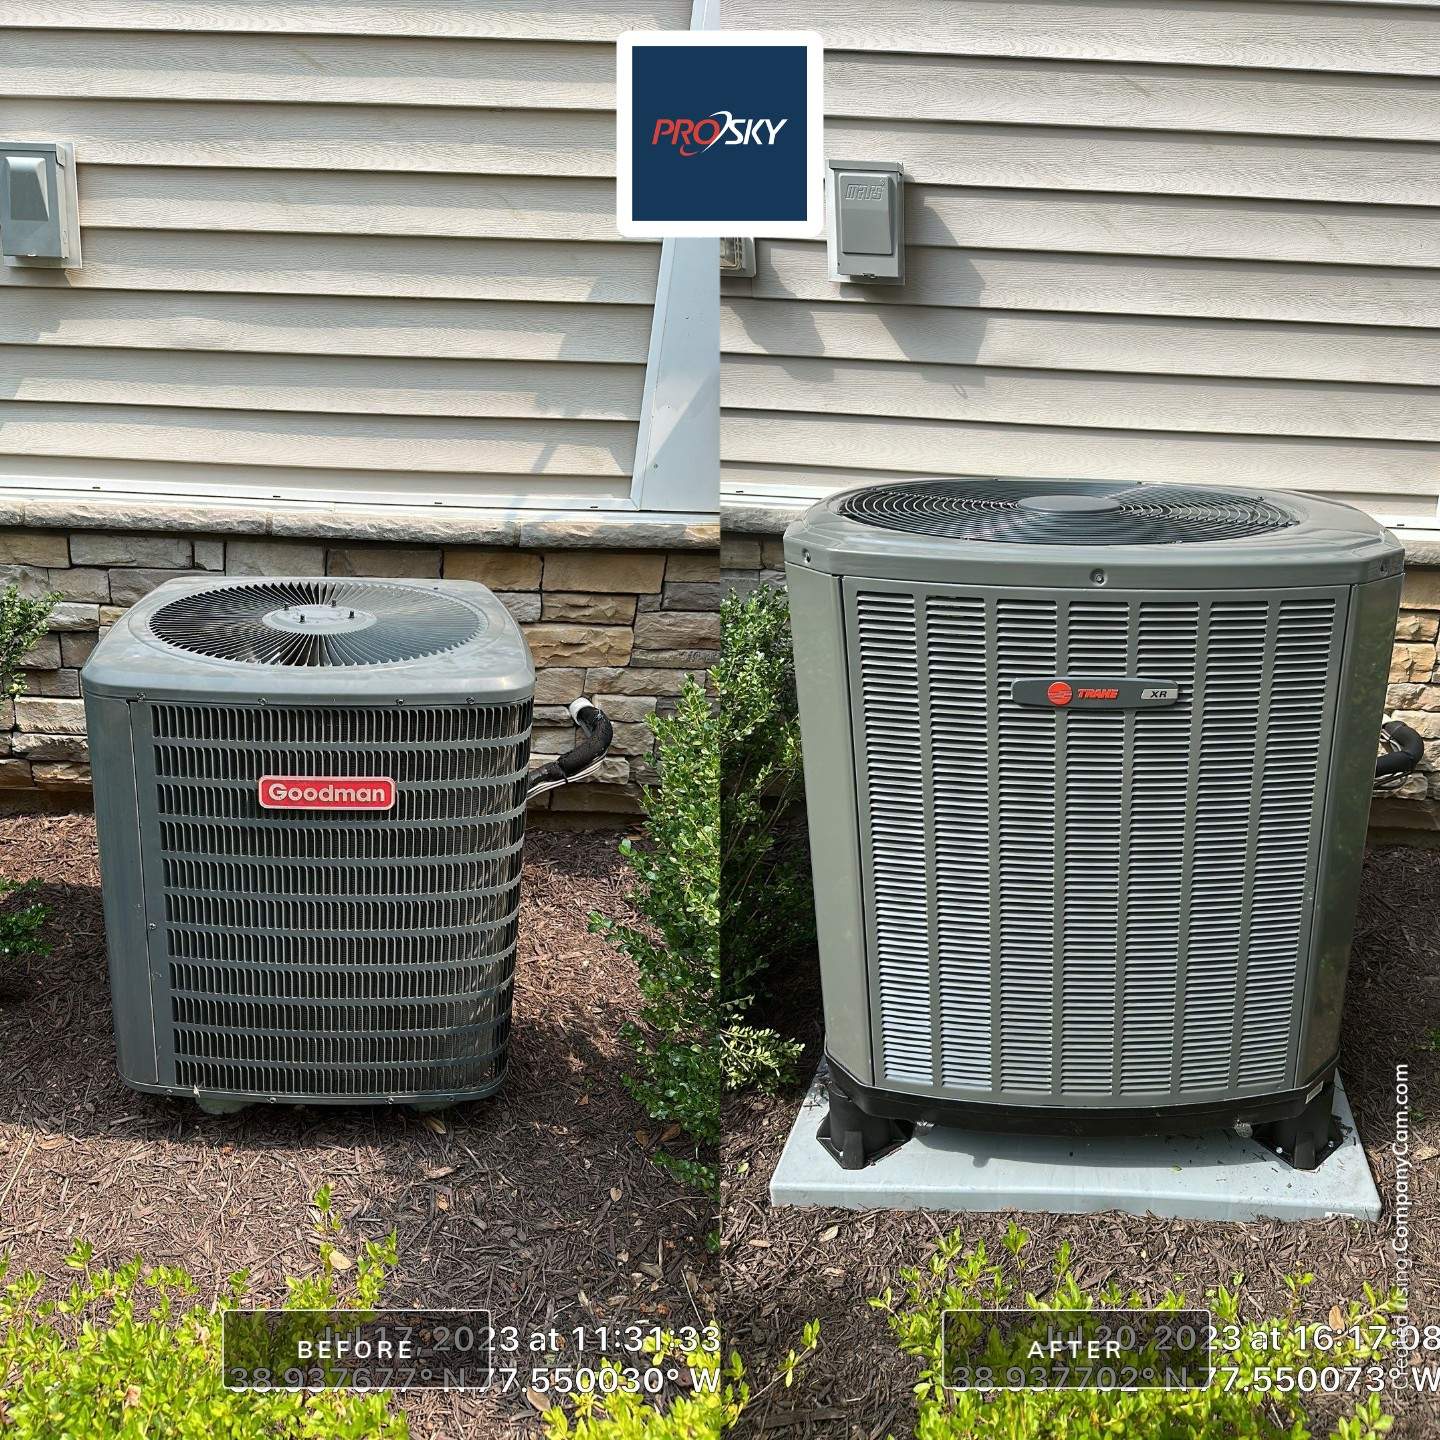 Emergency Replacement of Trane 15 SEER2 AC System for Family with Infant